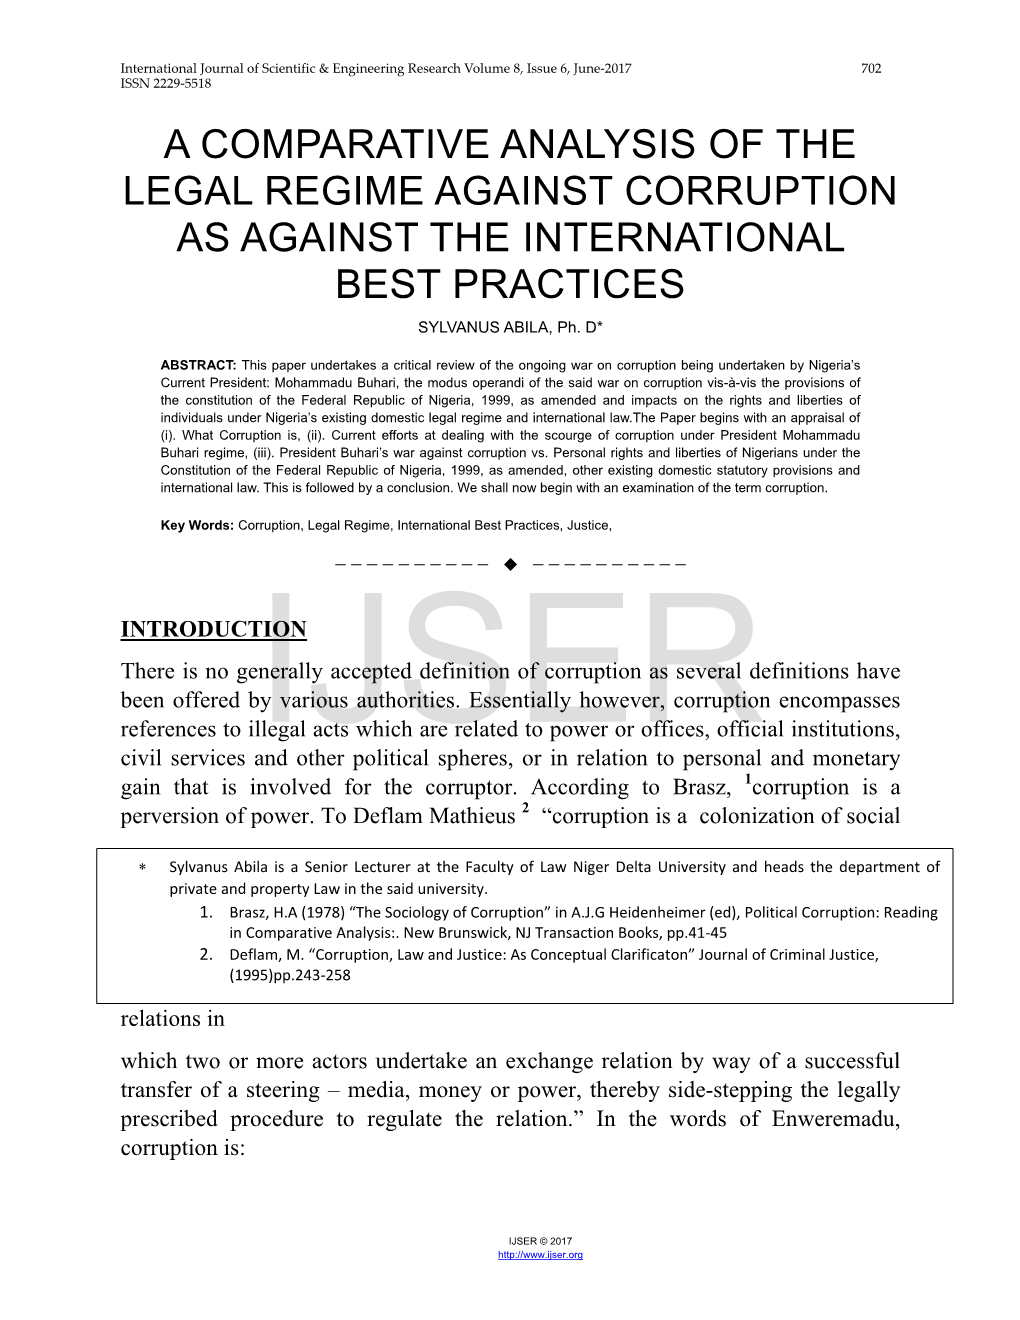 A COMPARATIVE ANALYSIS of the LEGAL REGIME AGAINST CORRUPTION AS AGAINST the INTERNATIONAL BEST PRACTICES SYLVANUS ABILA, Ph